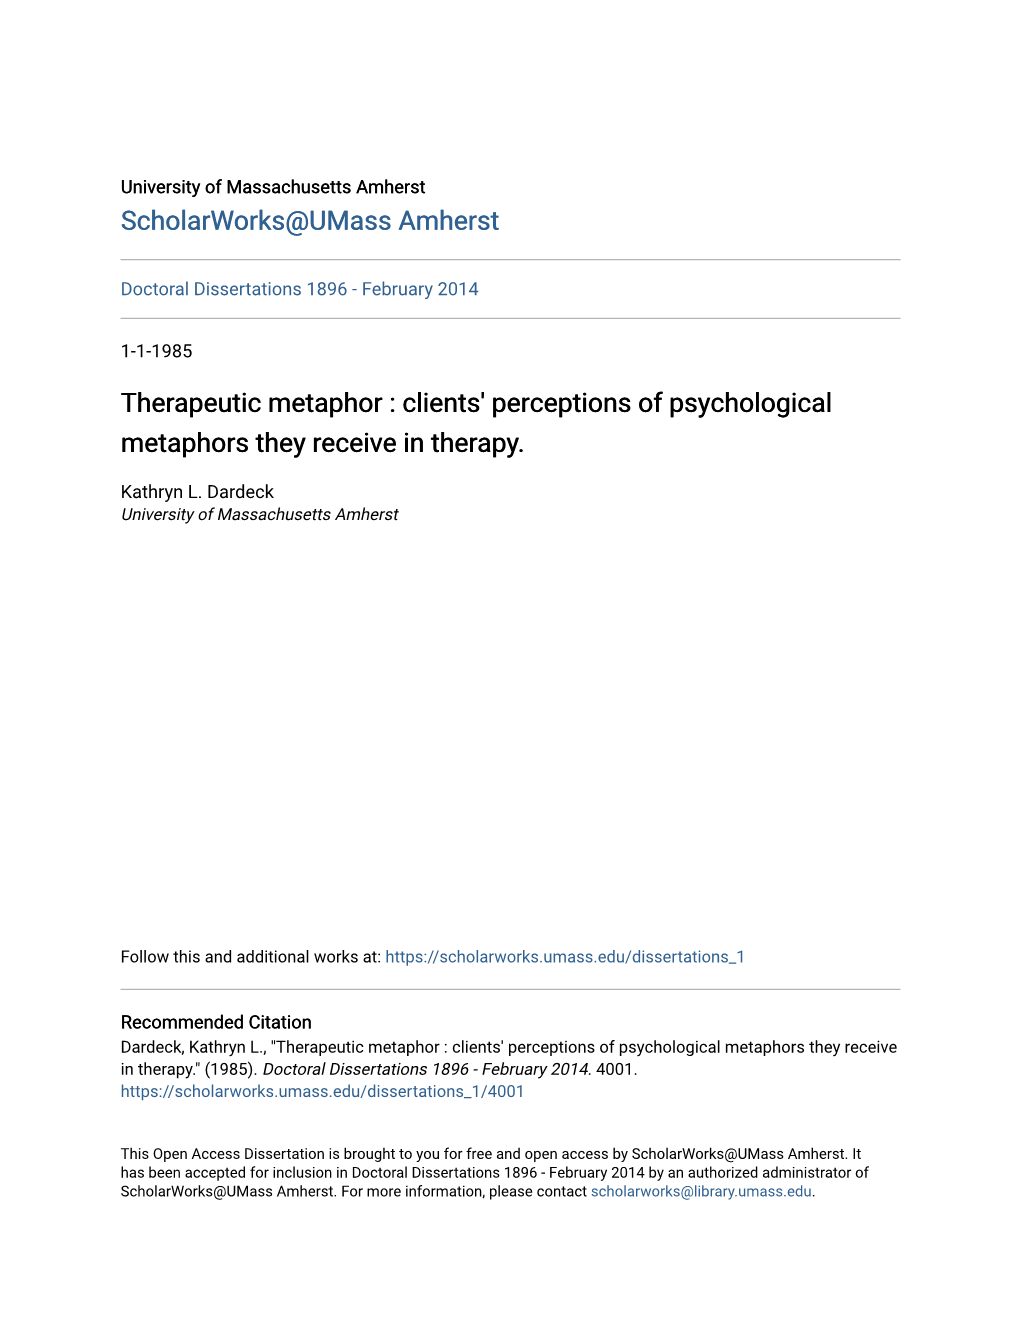 Clients' Perceptions of Psychological Metaphors They Receive in Therapy